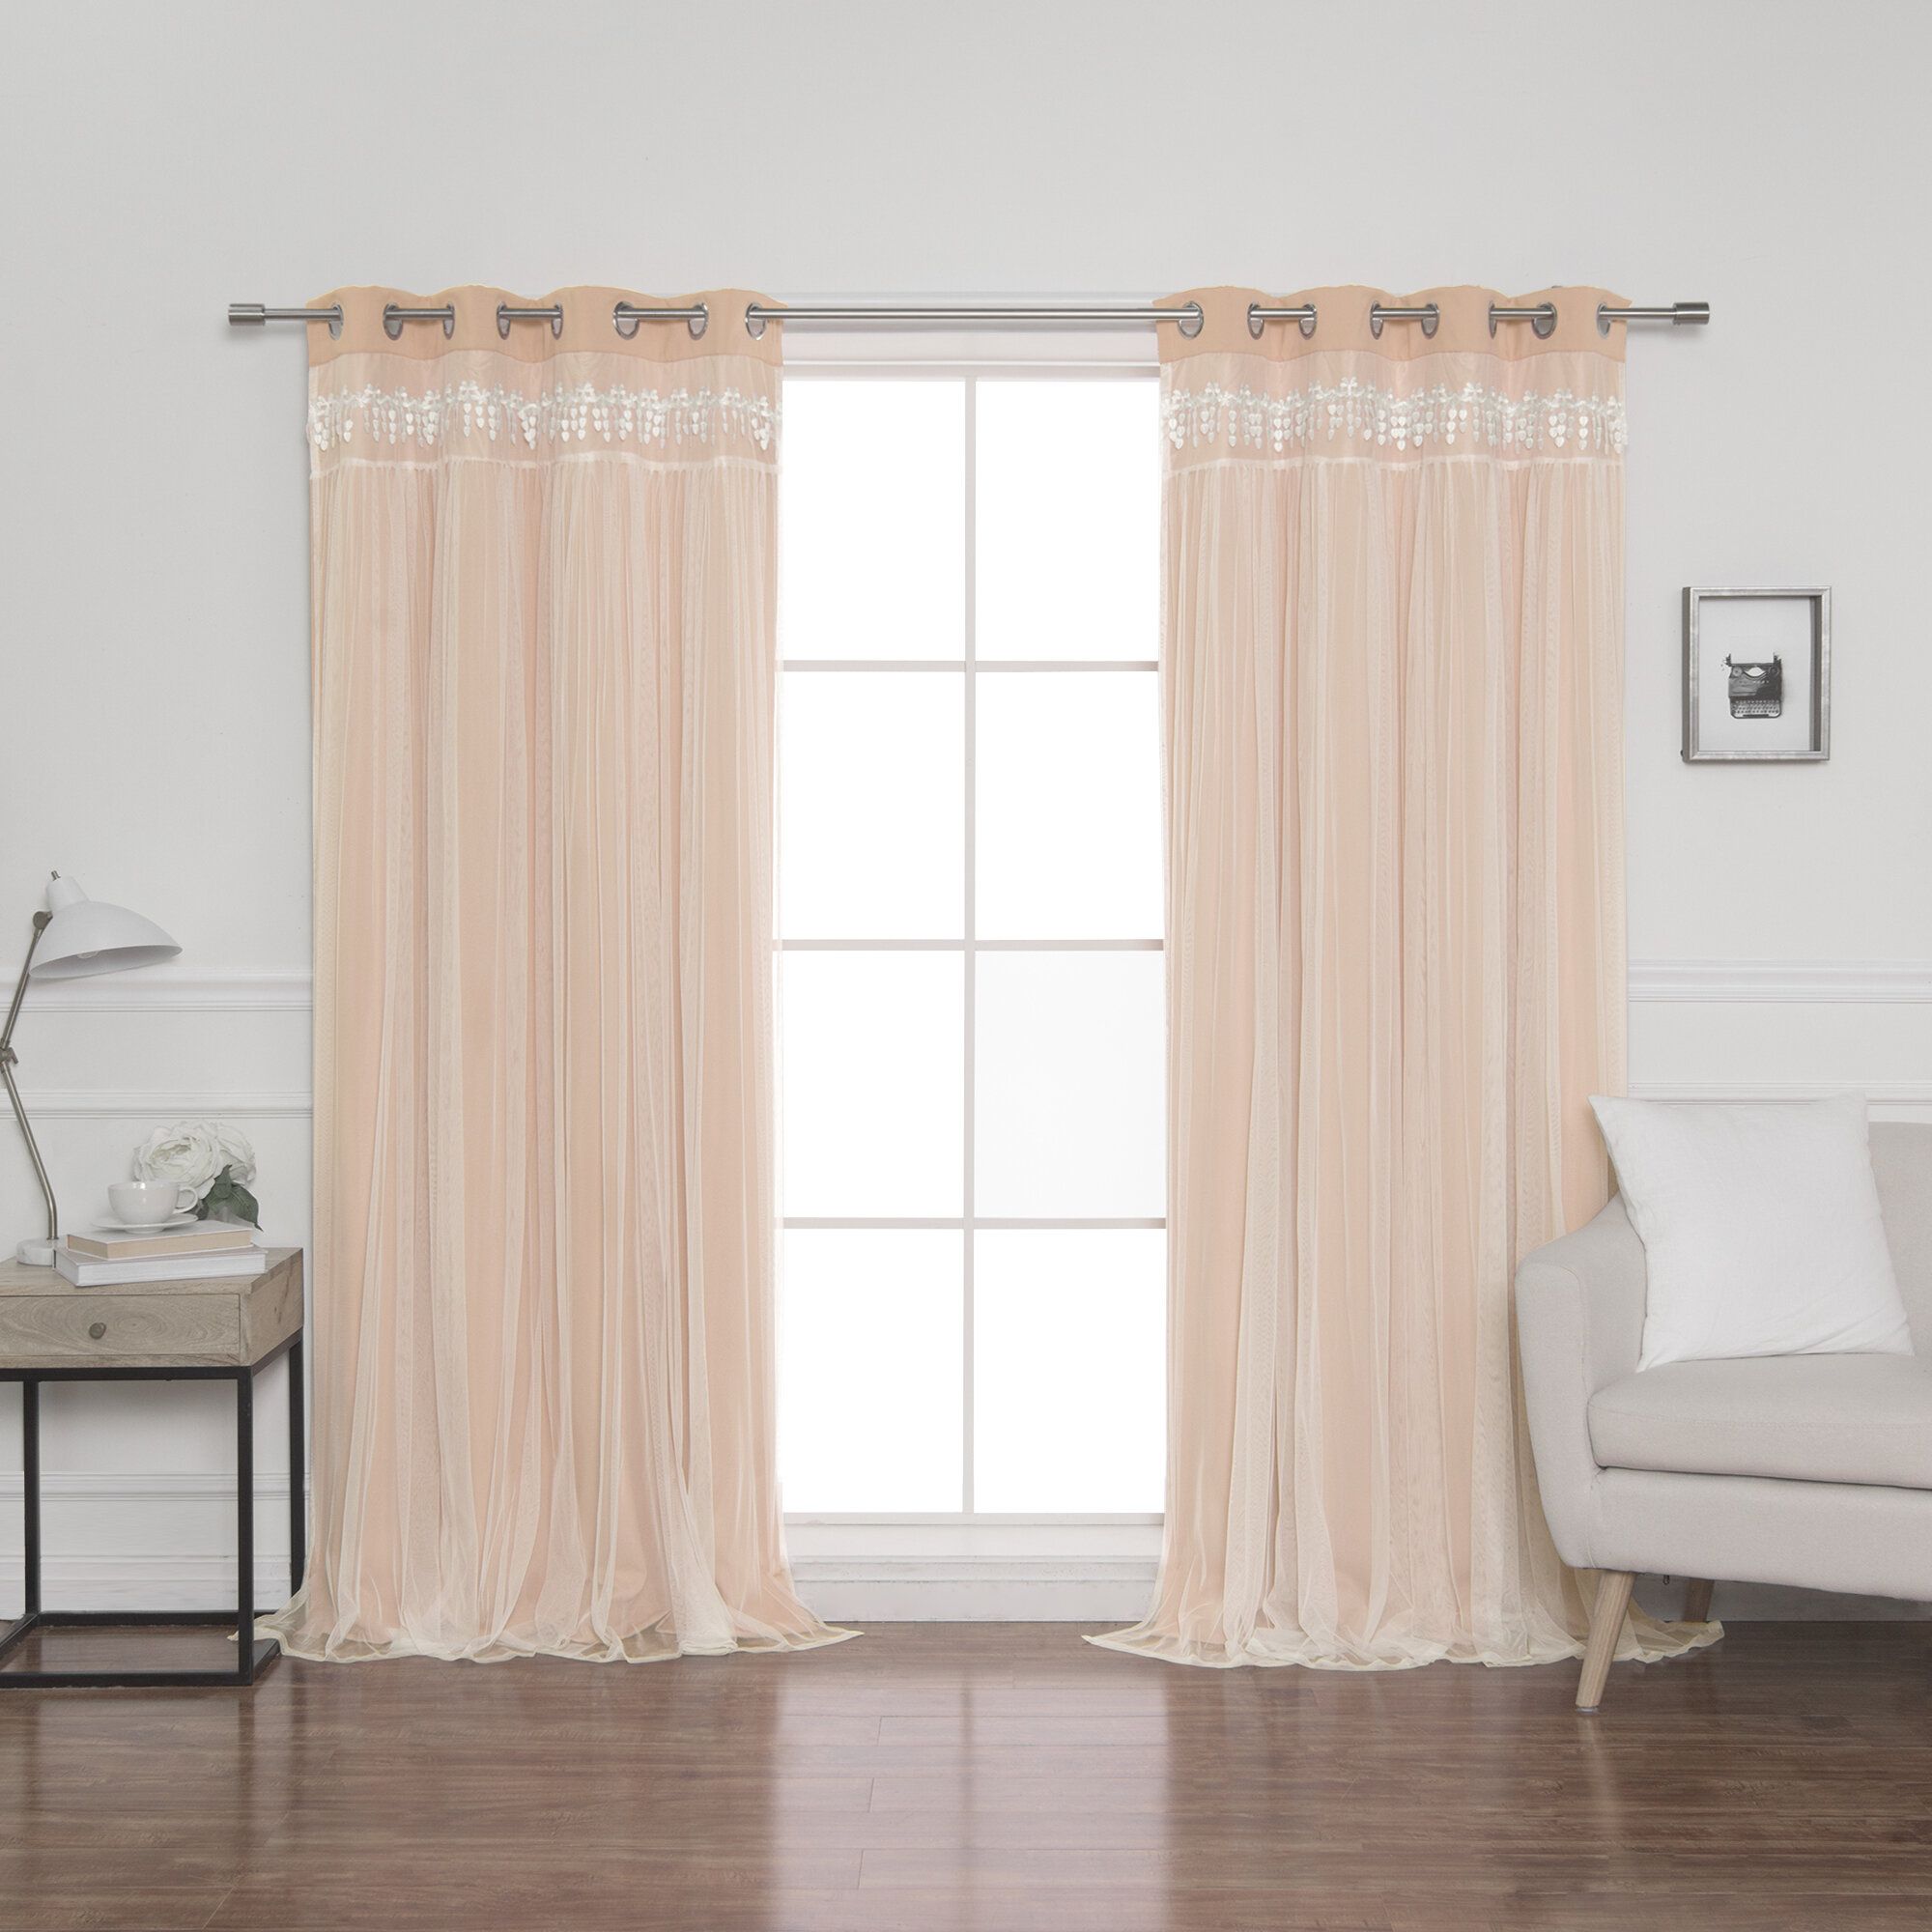 Loar Solid Blackout Thermal Grommet Curtain Panels With Regard To Thermal Woven Blackout Grommet Top Curtain Panel Pairs (View 30 of 30)